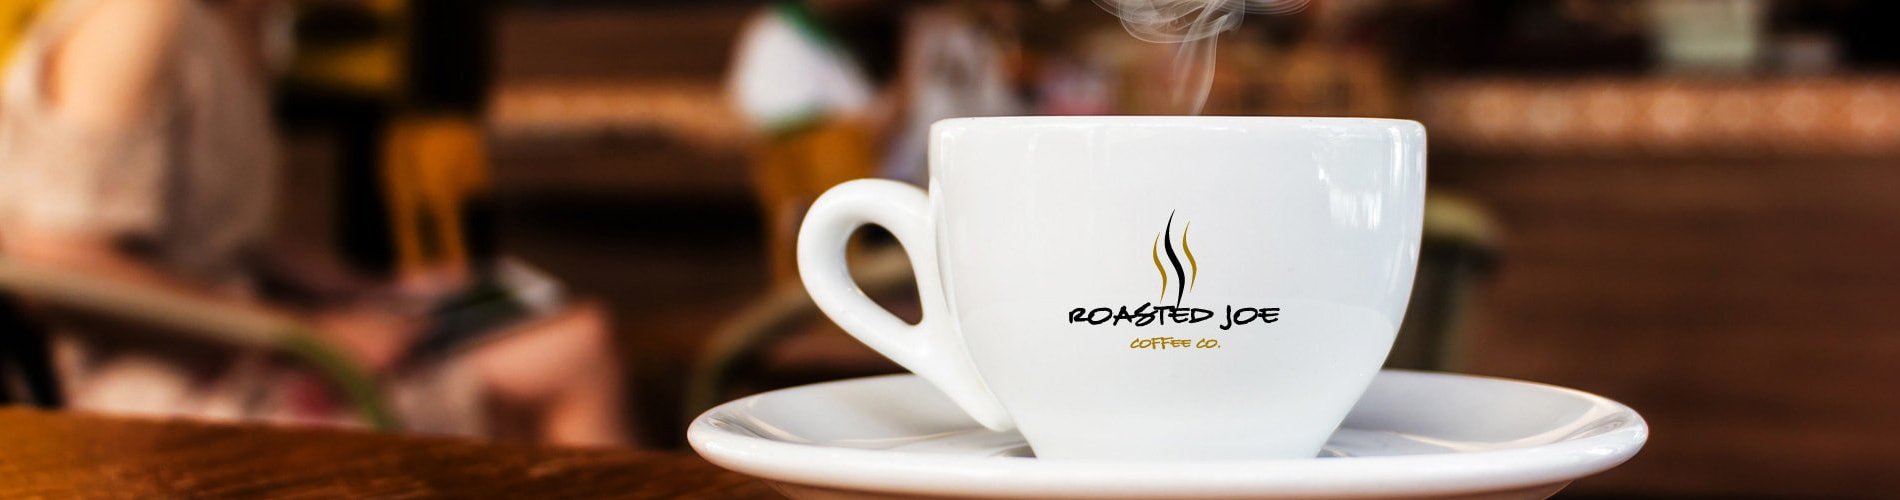 Roasted Joe Coffee Co. is a local owned office coffee / fundraising company in Minnesota.